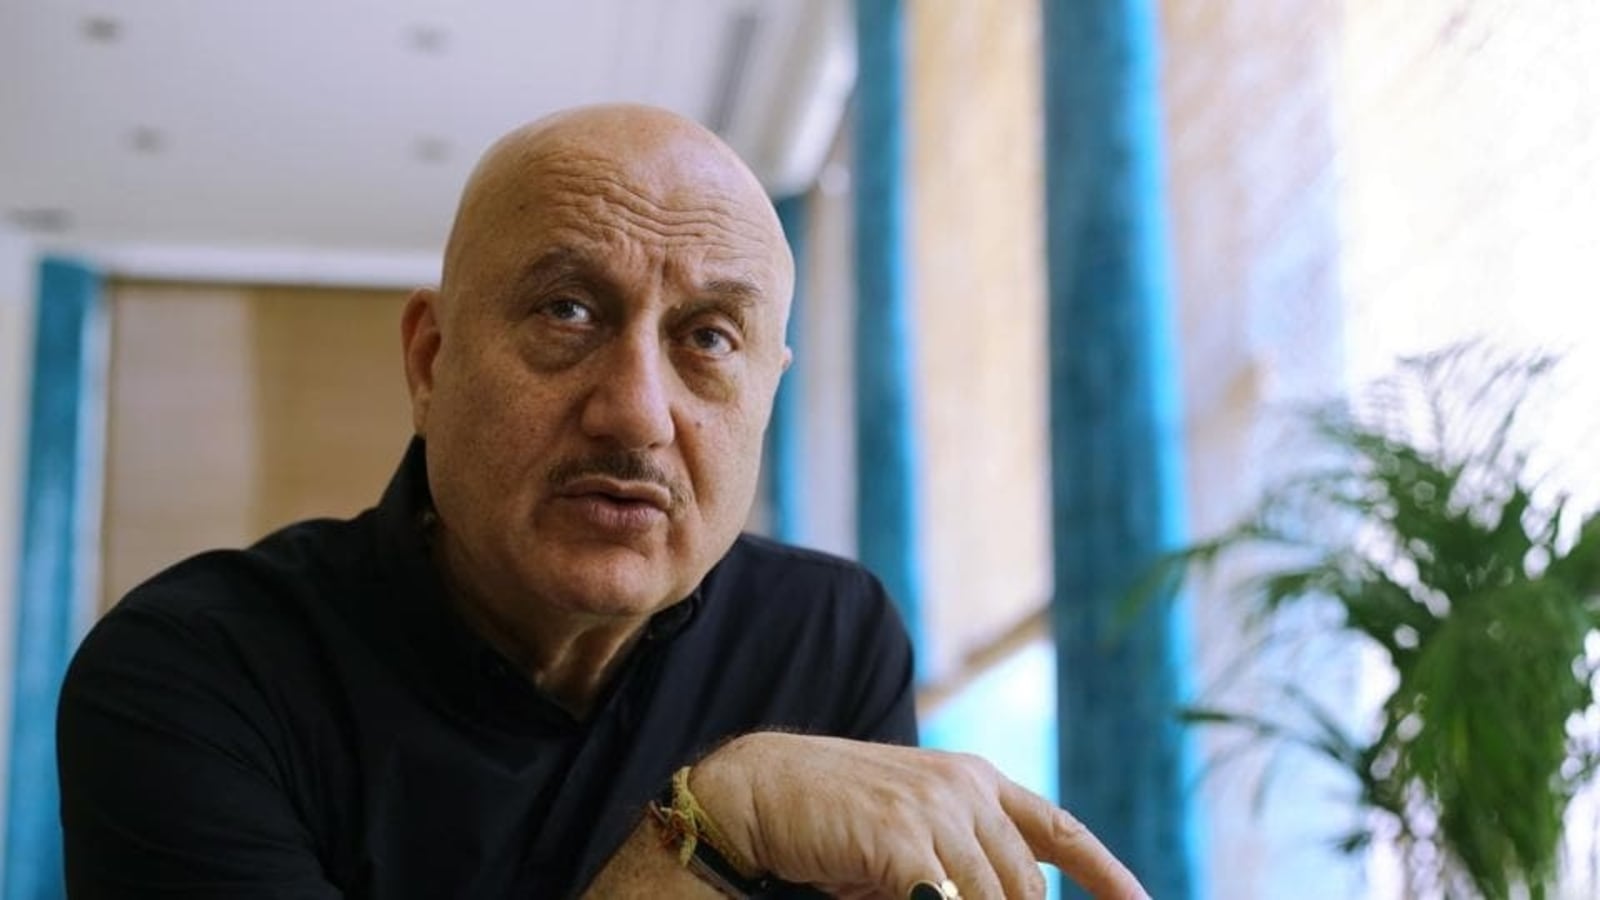 lion-will-of-course-show-its-teeth-anupam-kher-on-national-emblem-row